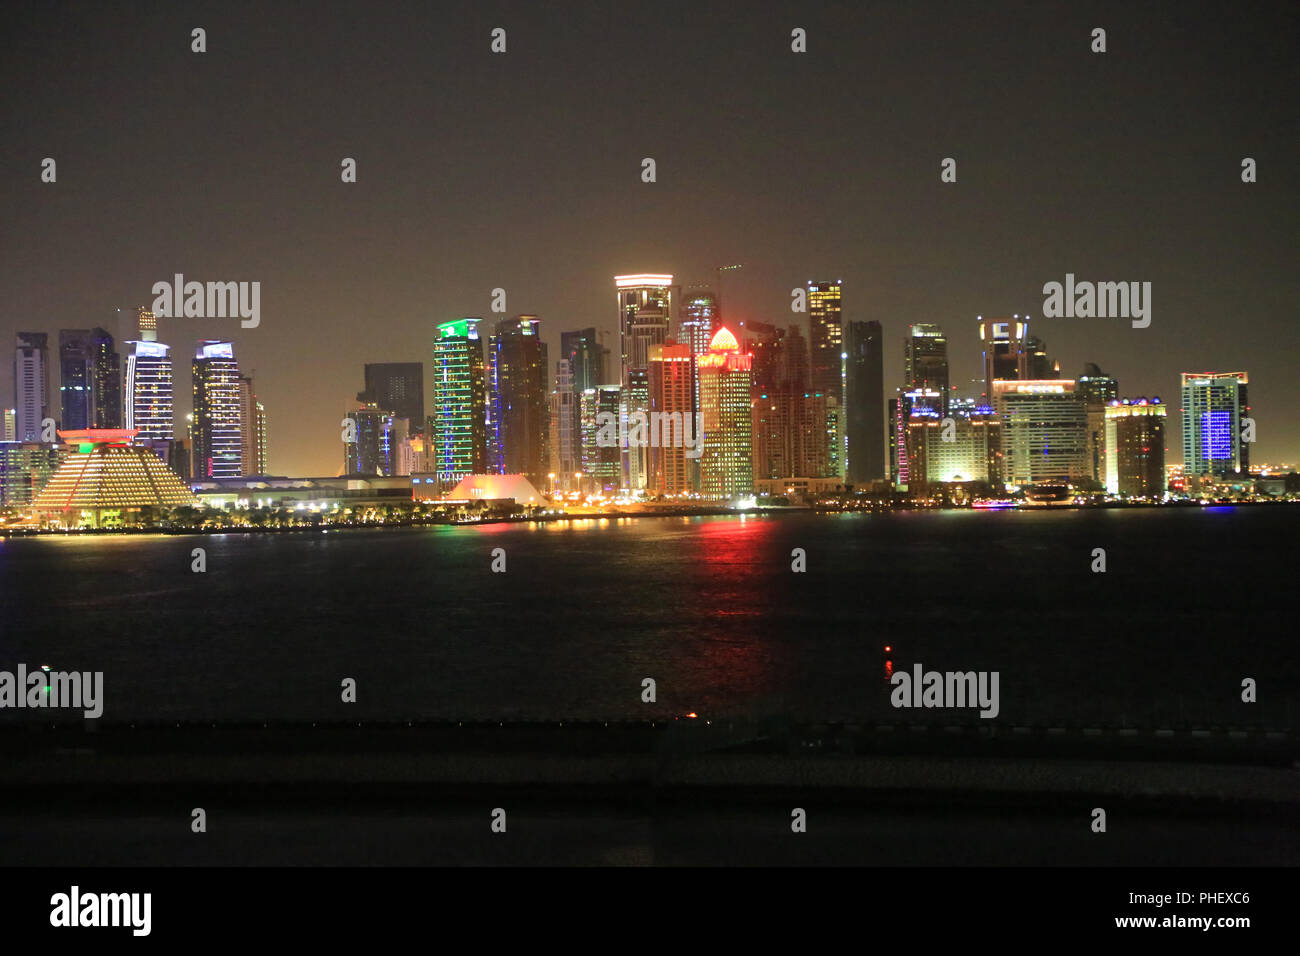 Qatar, Doha, capitale skyline at night Banque D'Images